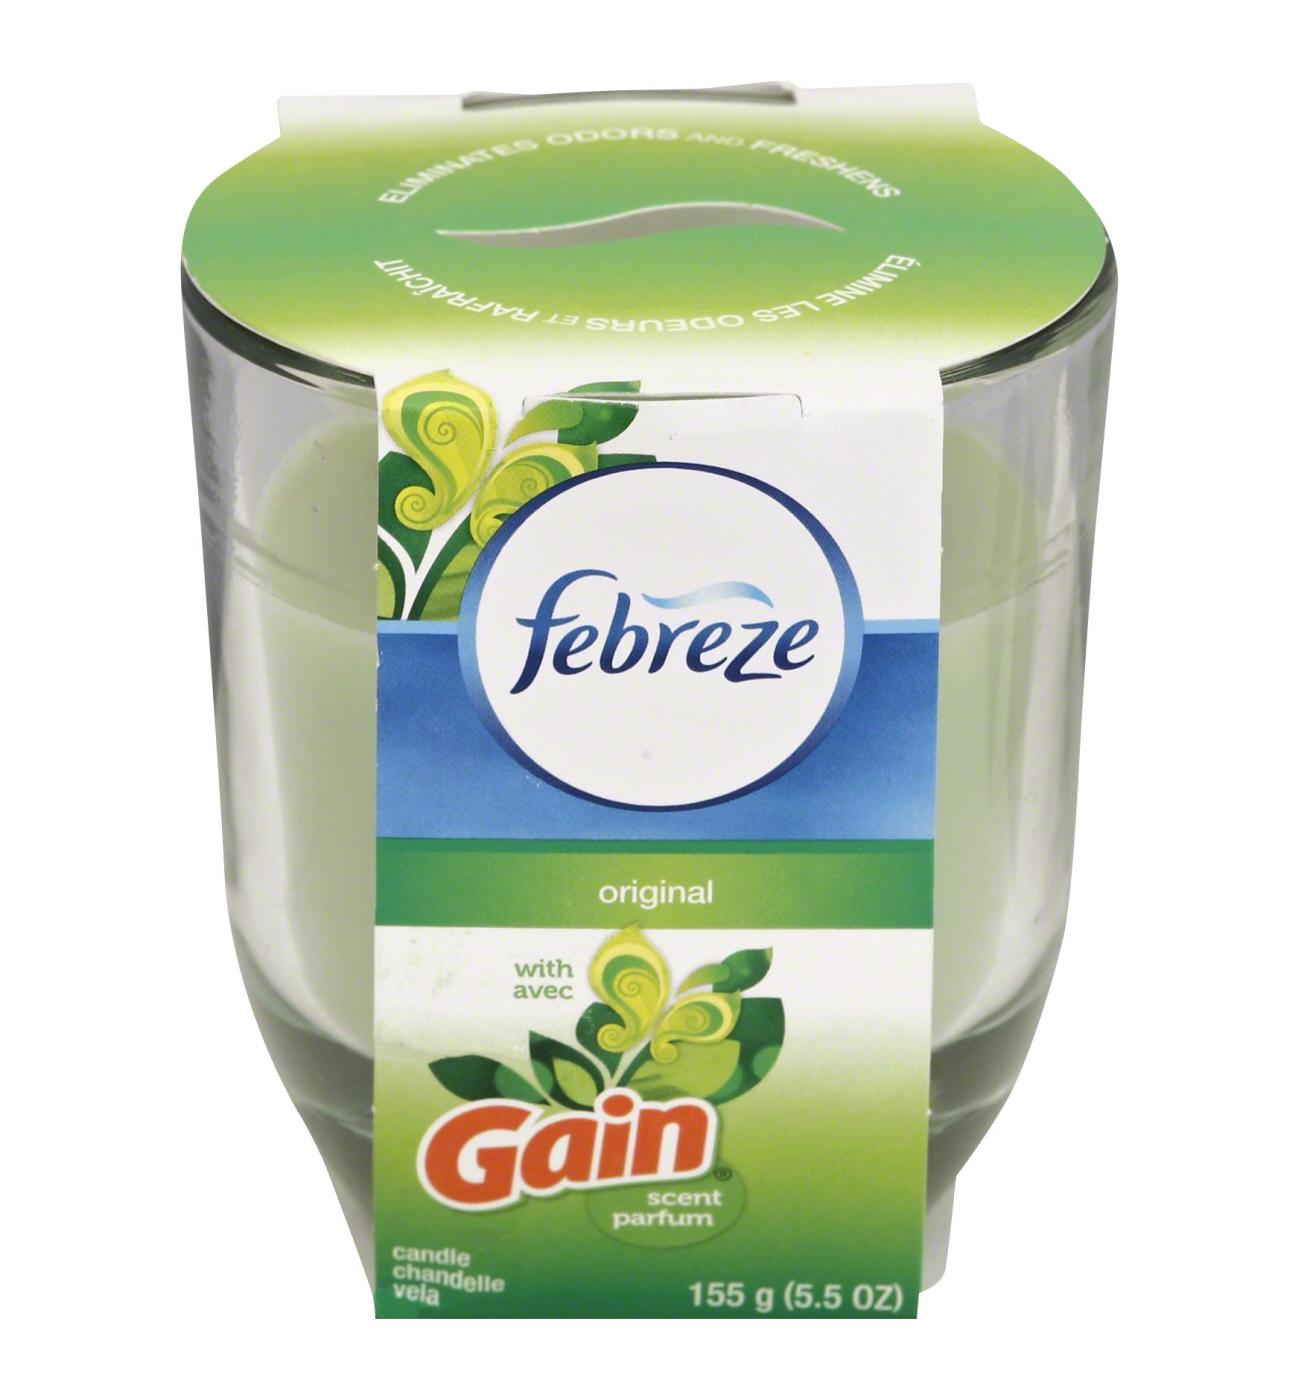 Febreze Original Candle with Gain Scent; image 1 of 2